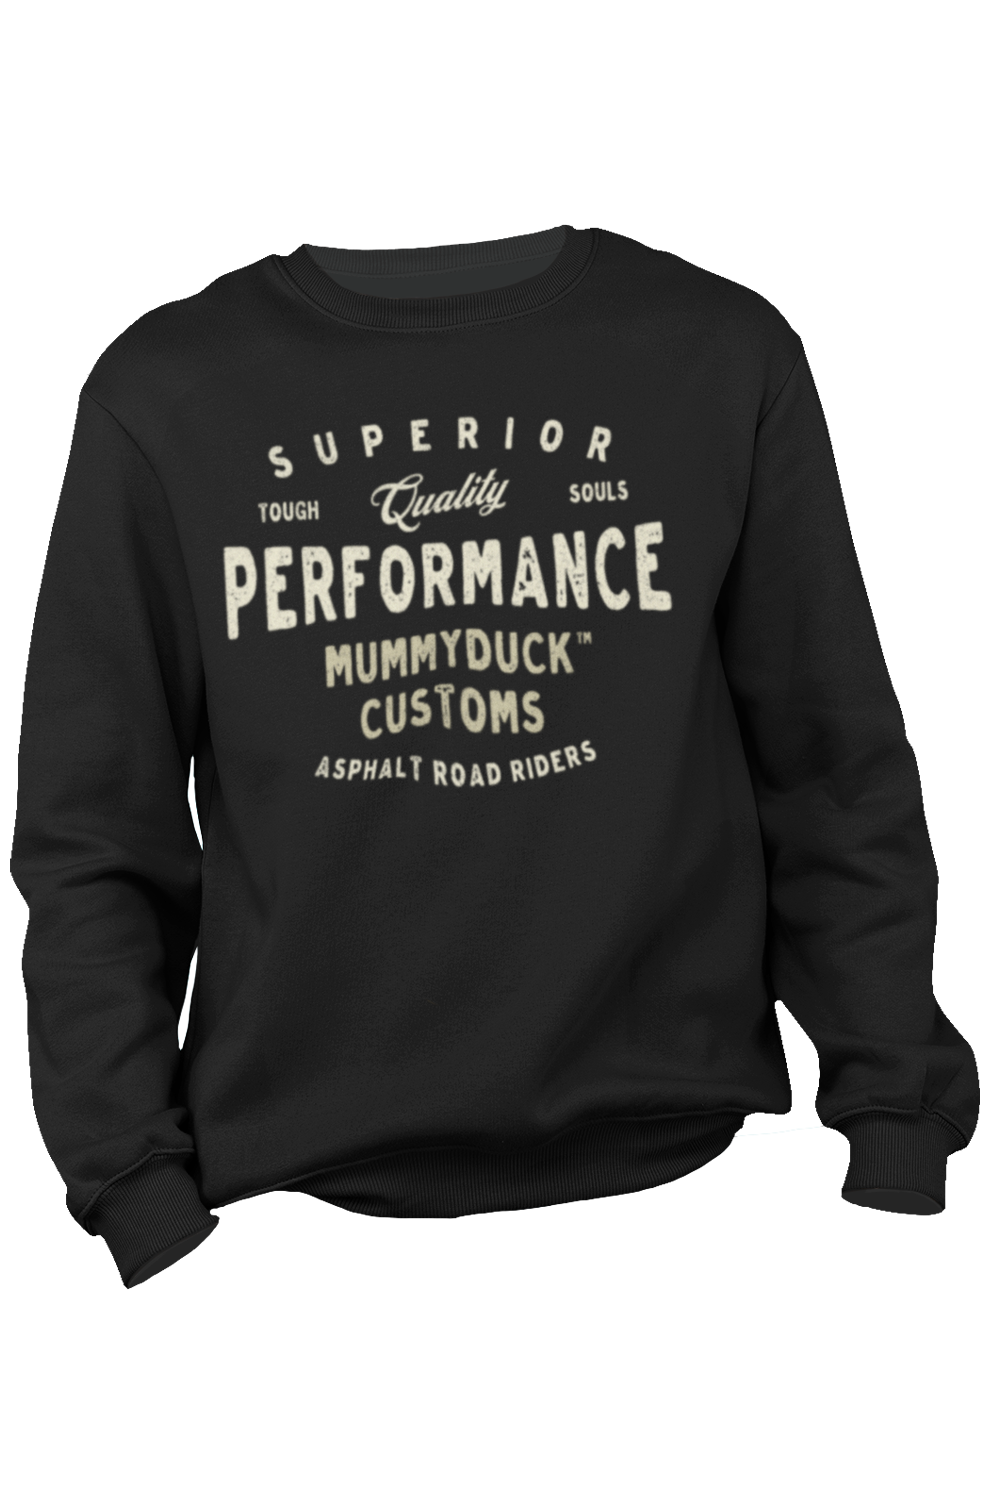 A sturdy and warm sweatshirt bound to keep you warm in the colder months. A pre-shrunk, classic fit Superior performance Motorcycle Sweatshirt by Mummyduck Customs is made with air-jet spun yarn for a soft feel and reduced pilling. Design by Harri from HEL